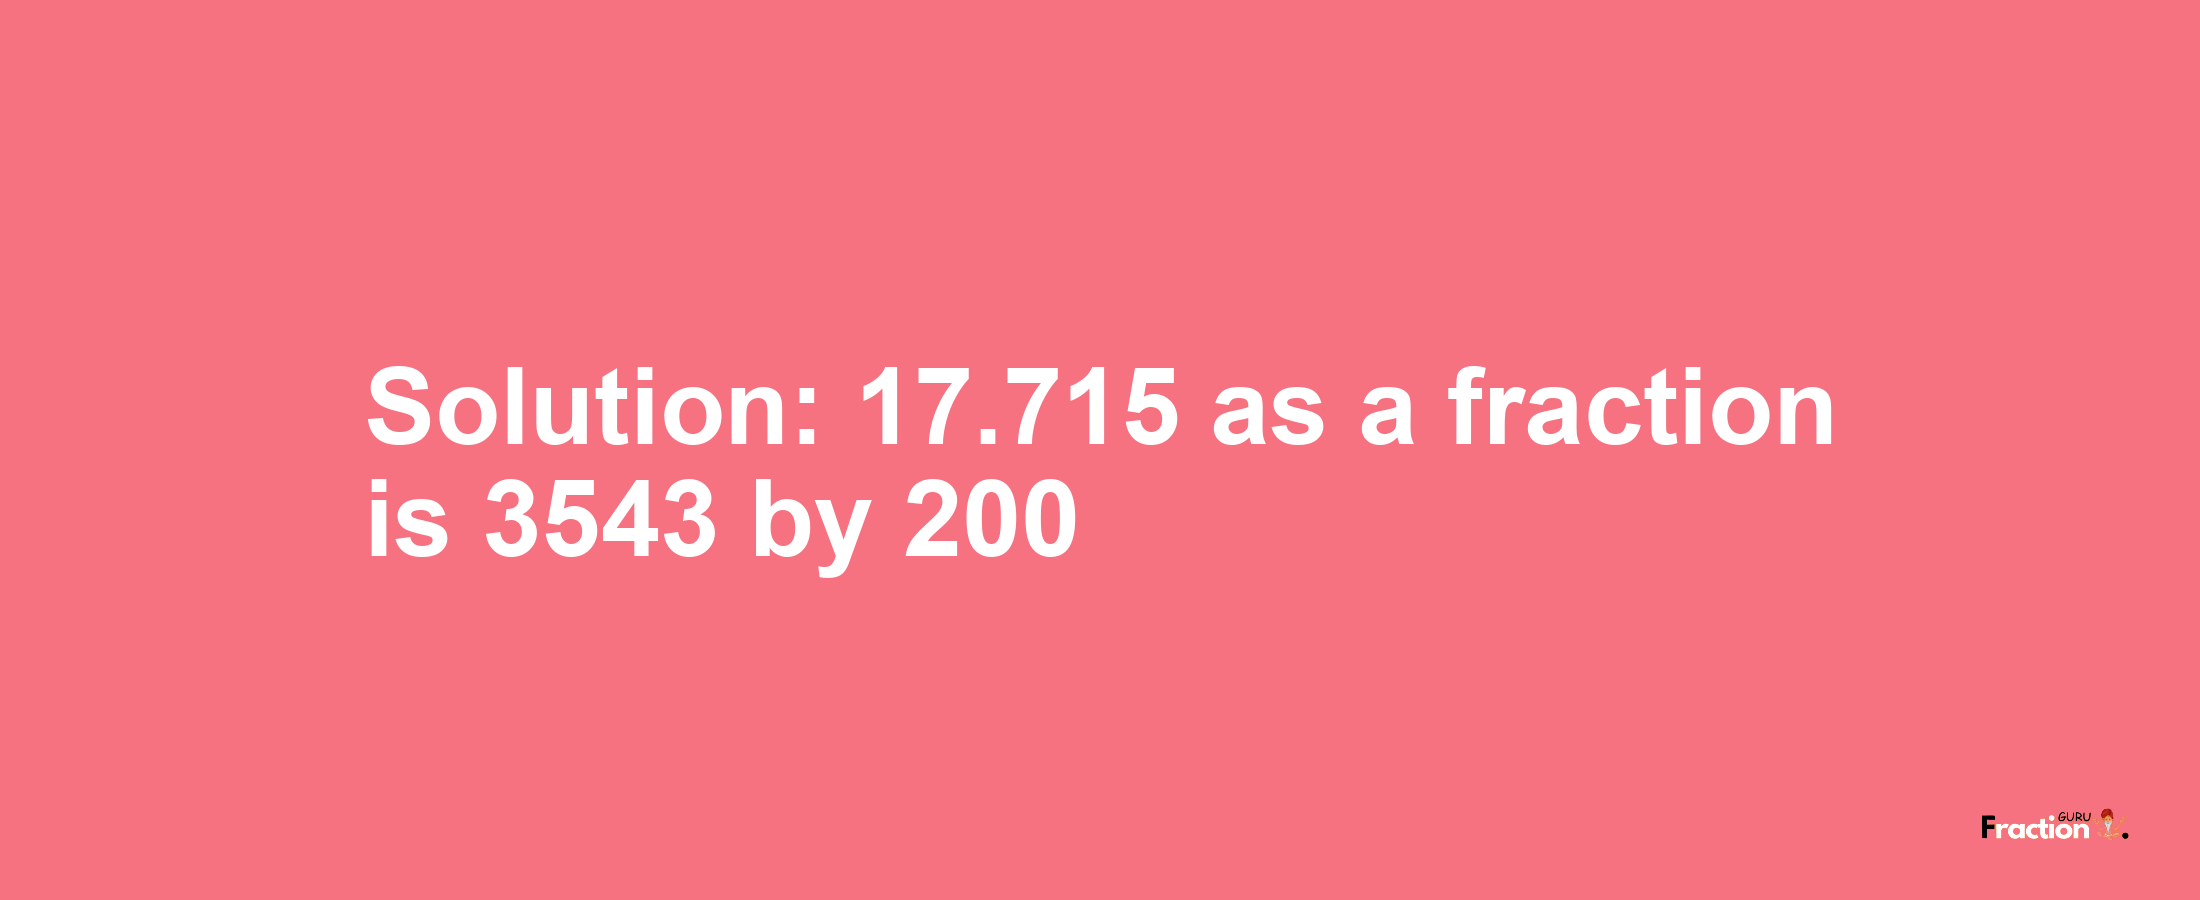 Solution:17.715 as a fraction is 3543/200